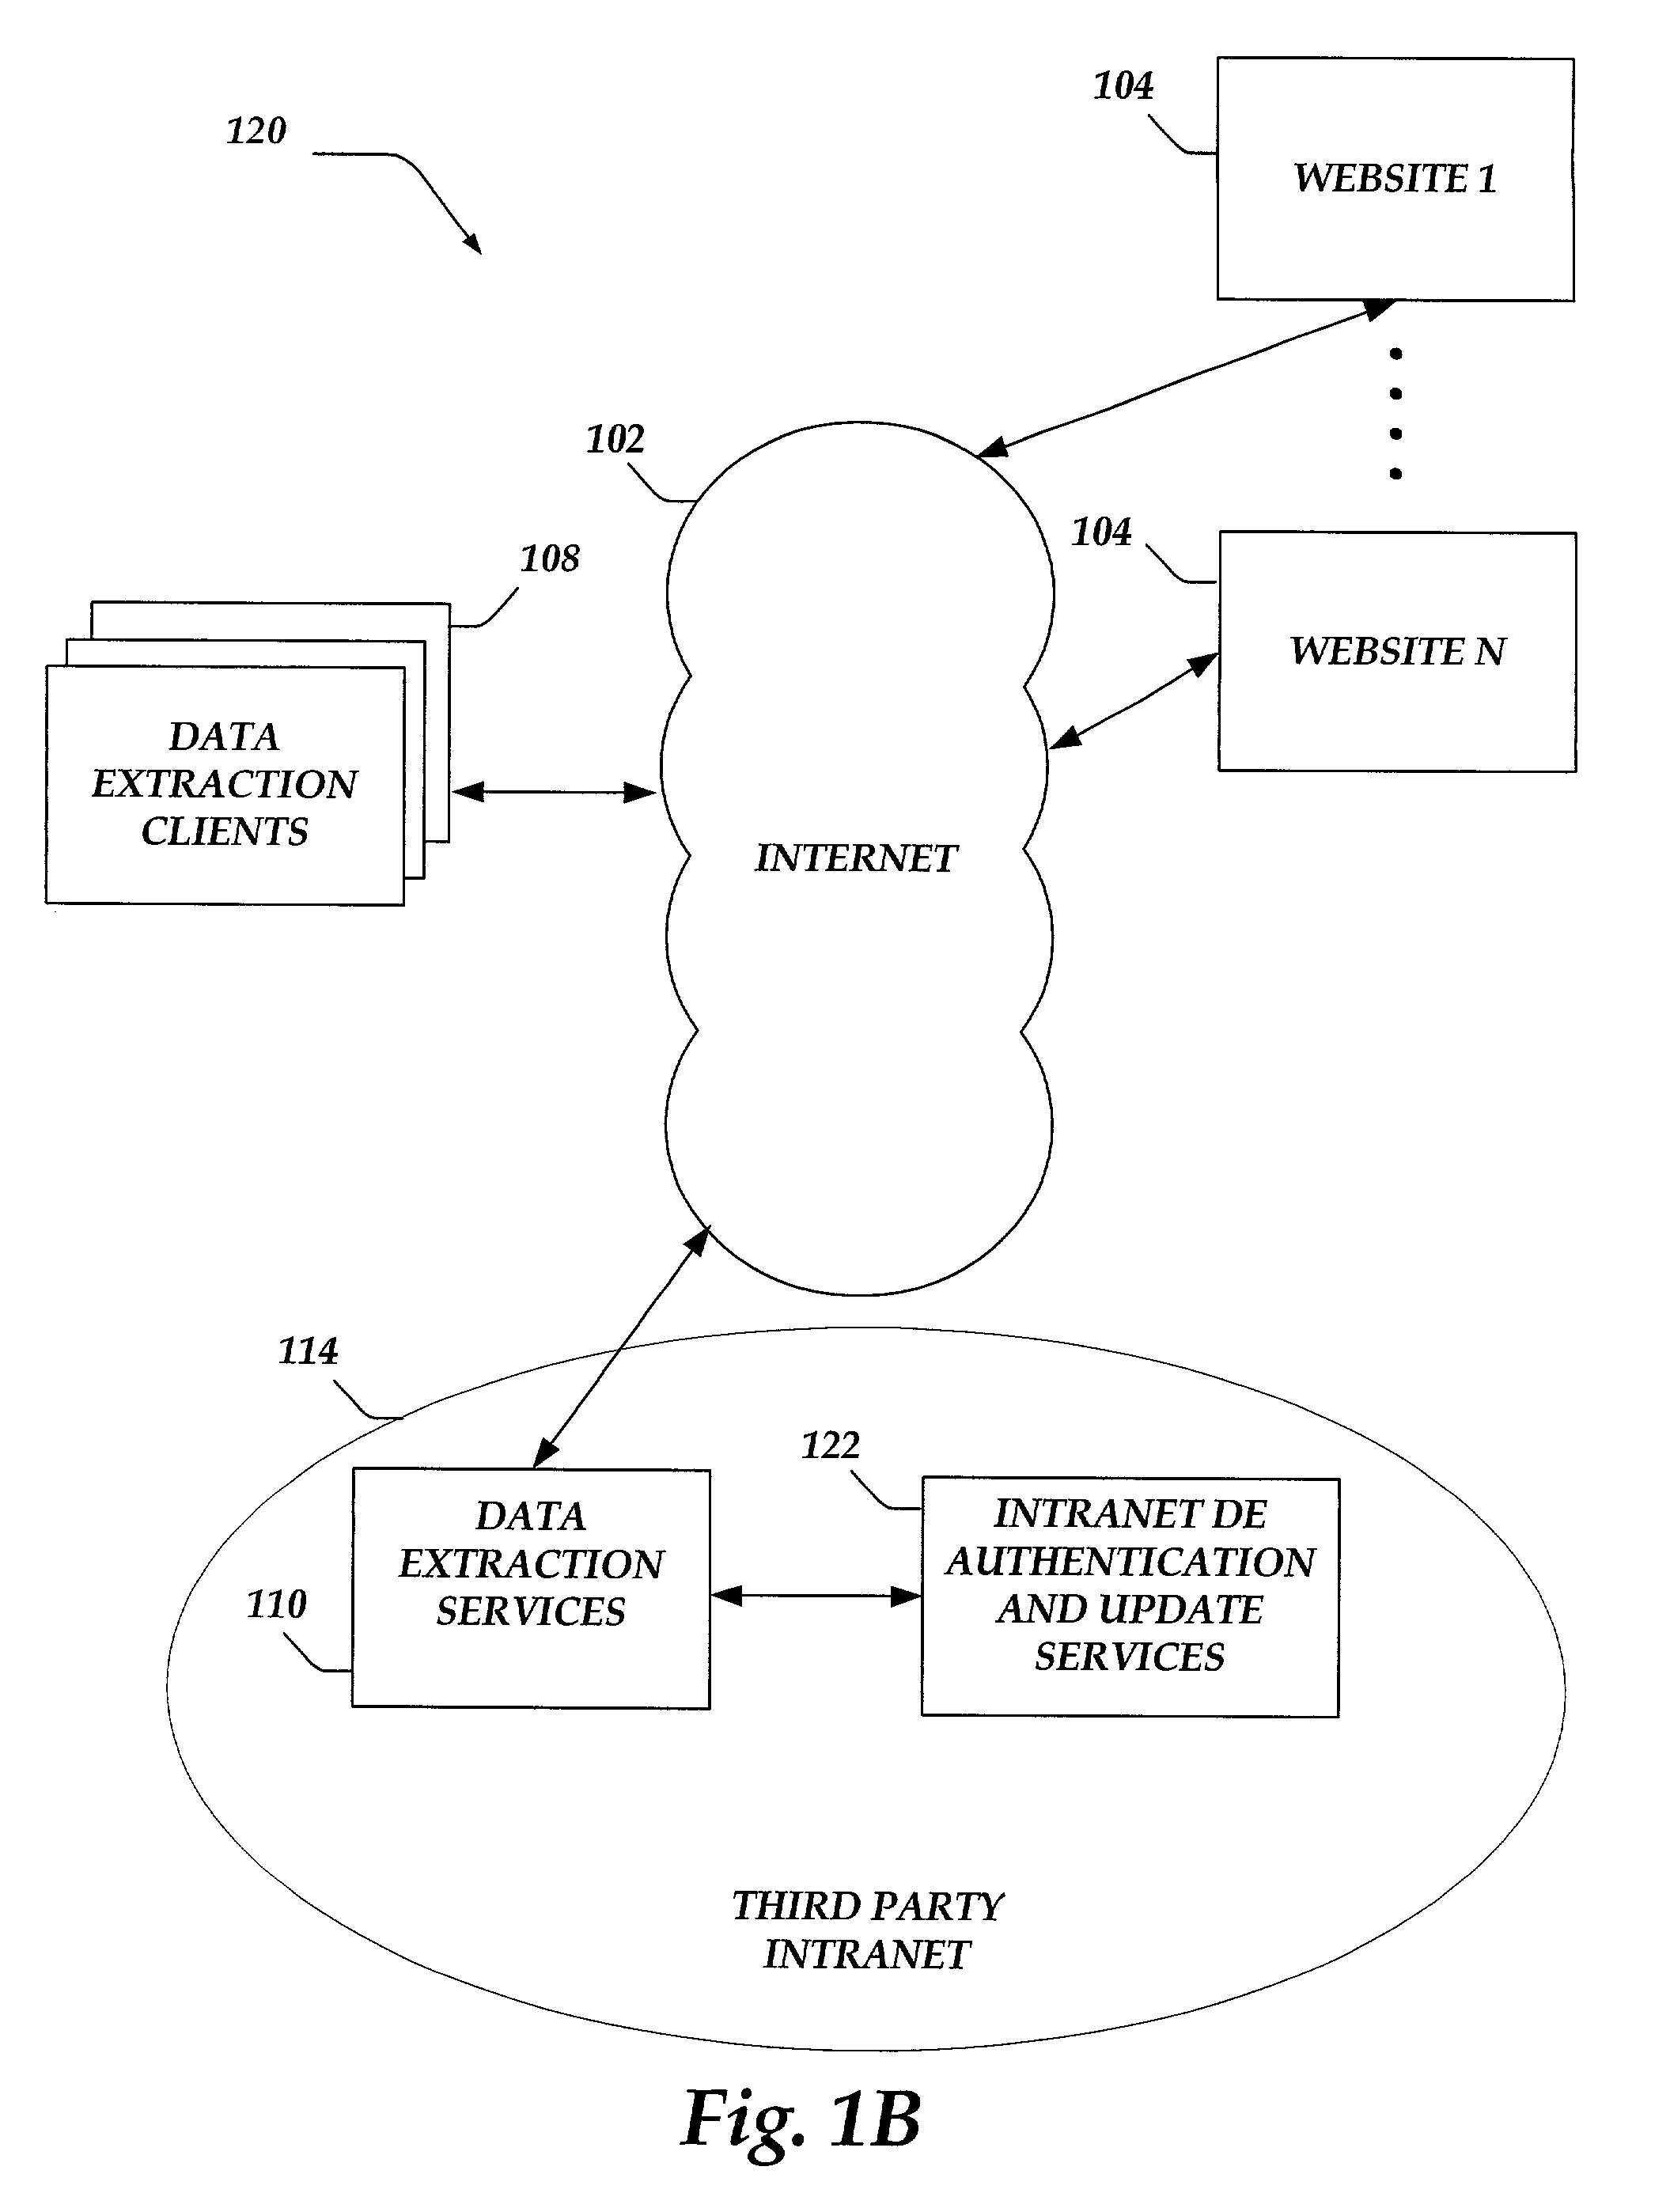 Method and system for extraction and organizing selected data from sources on a network